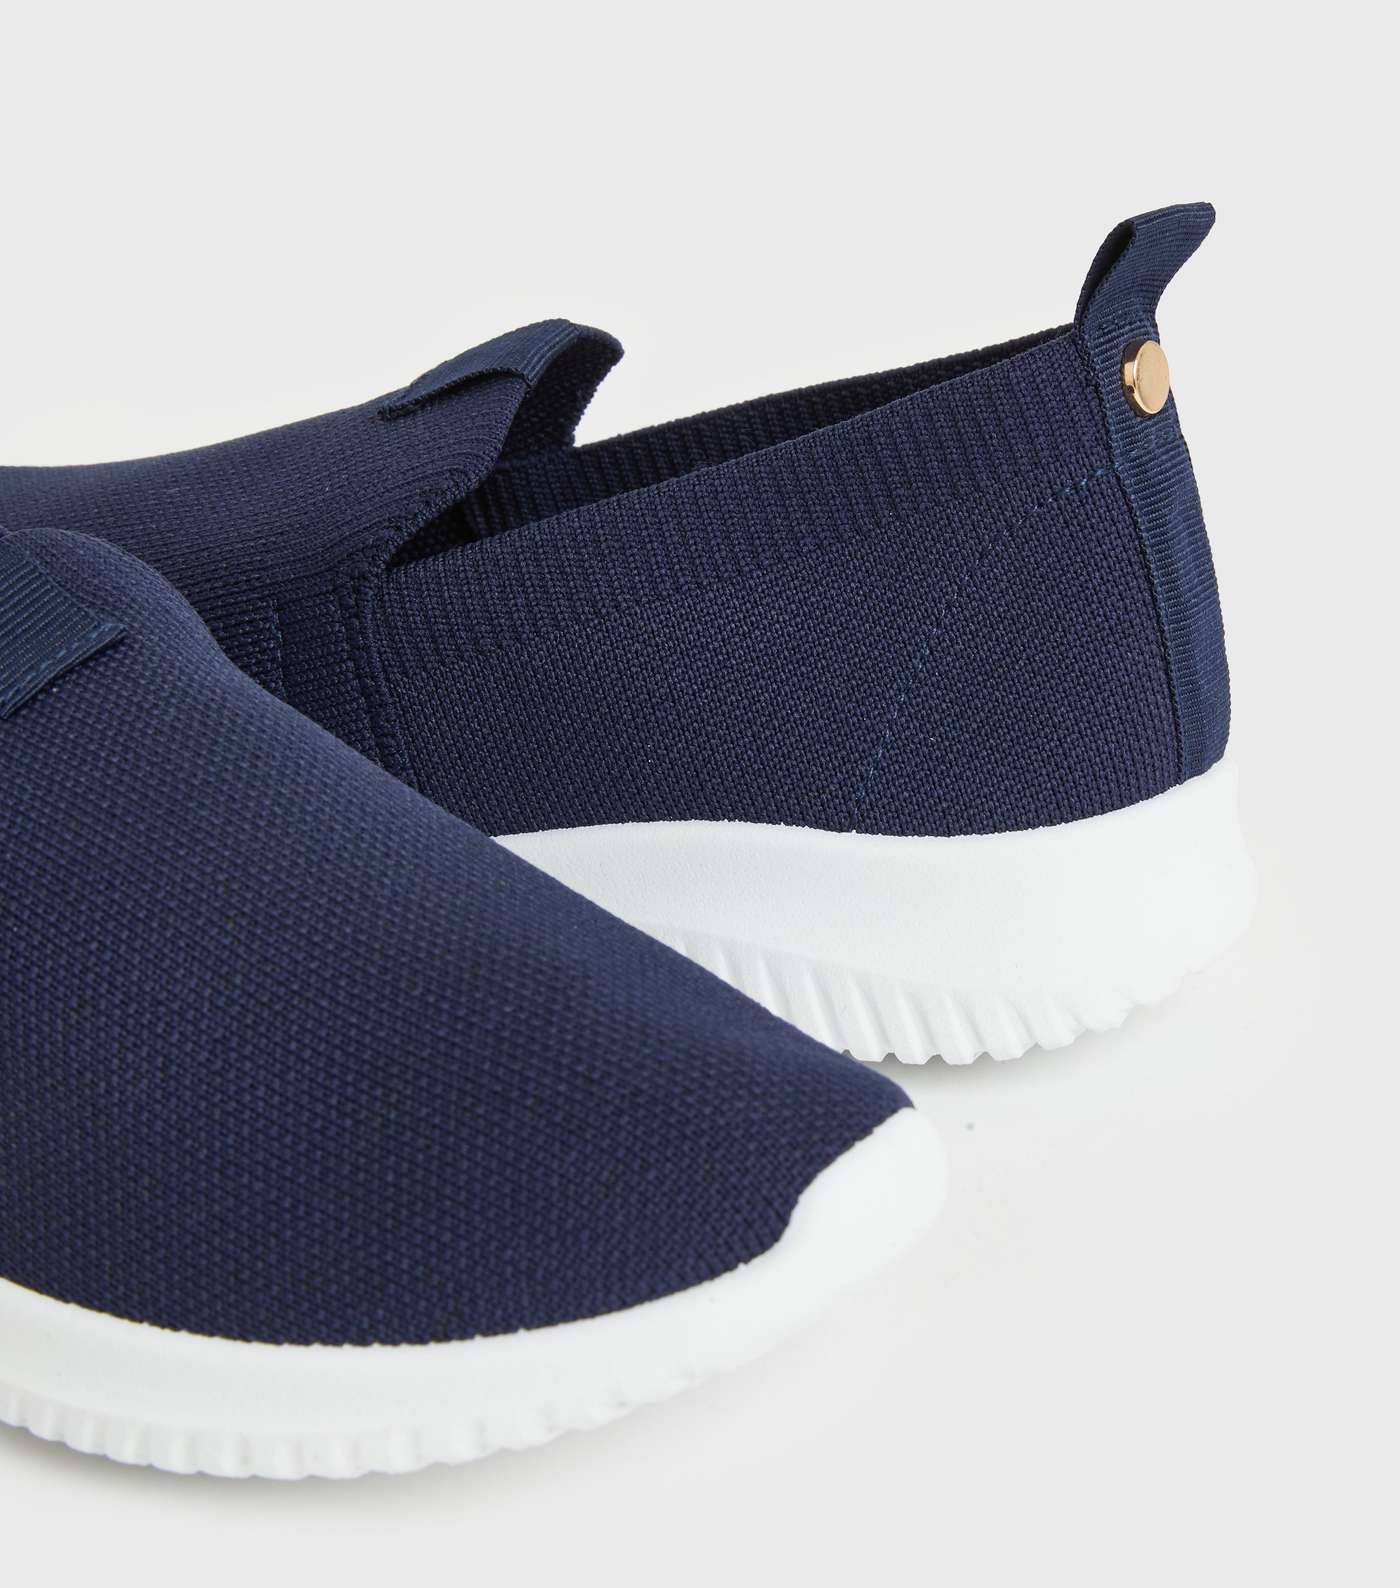 Navy Slip On Trainers Image 4